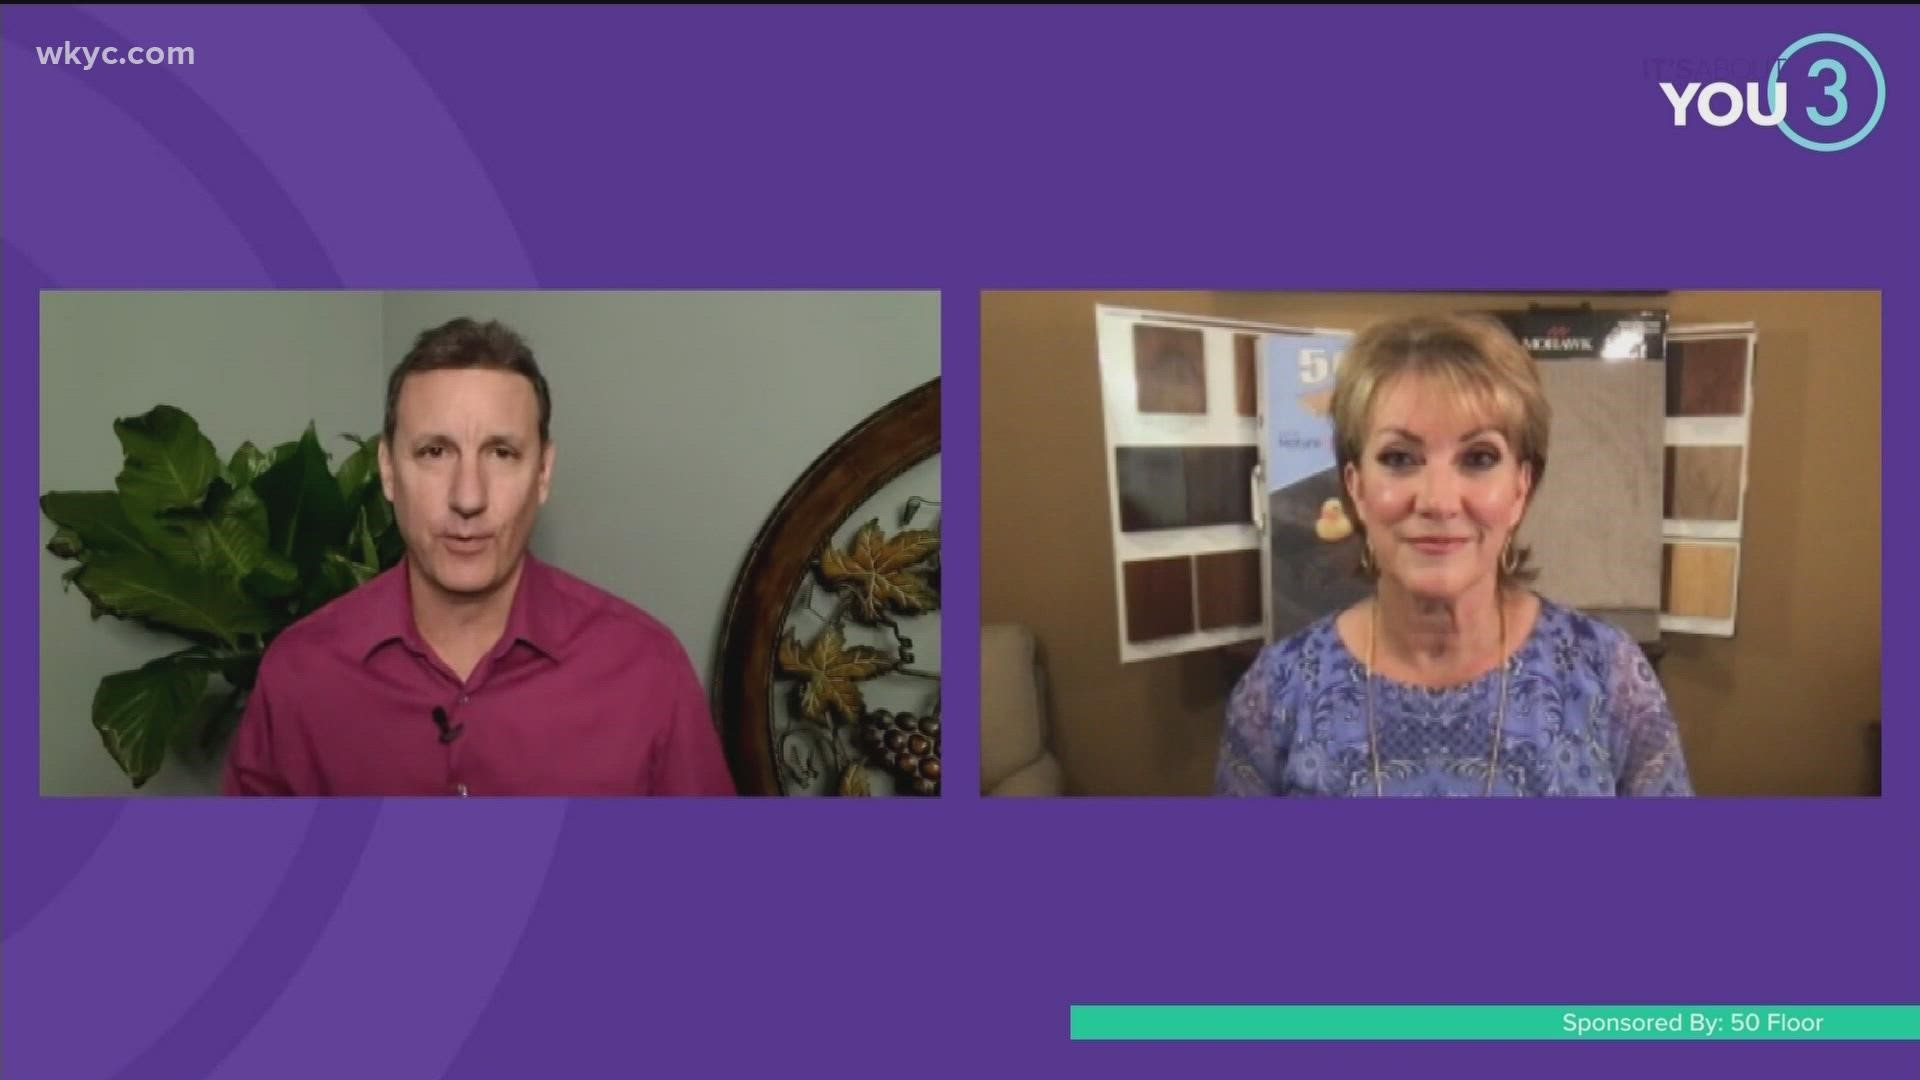 Joe is learning about upgrading your home! Judy Brown joins him to talk about 50 Floor and why September is the best month to re-do your flooring!